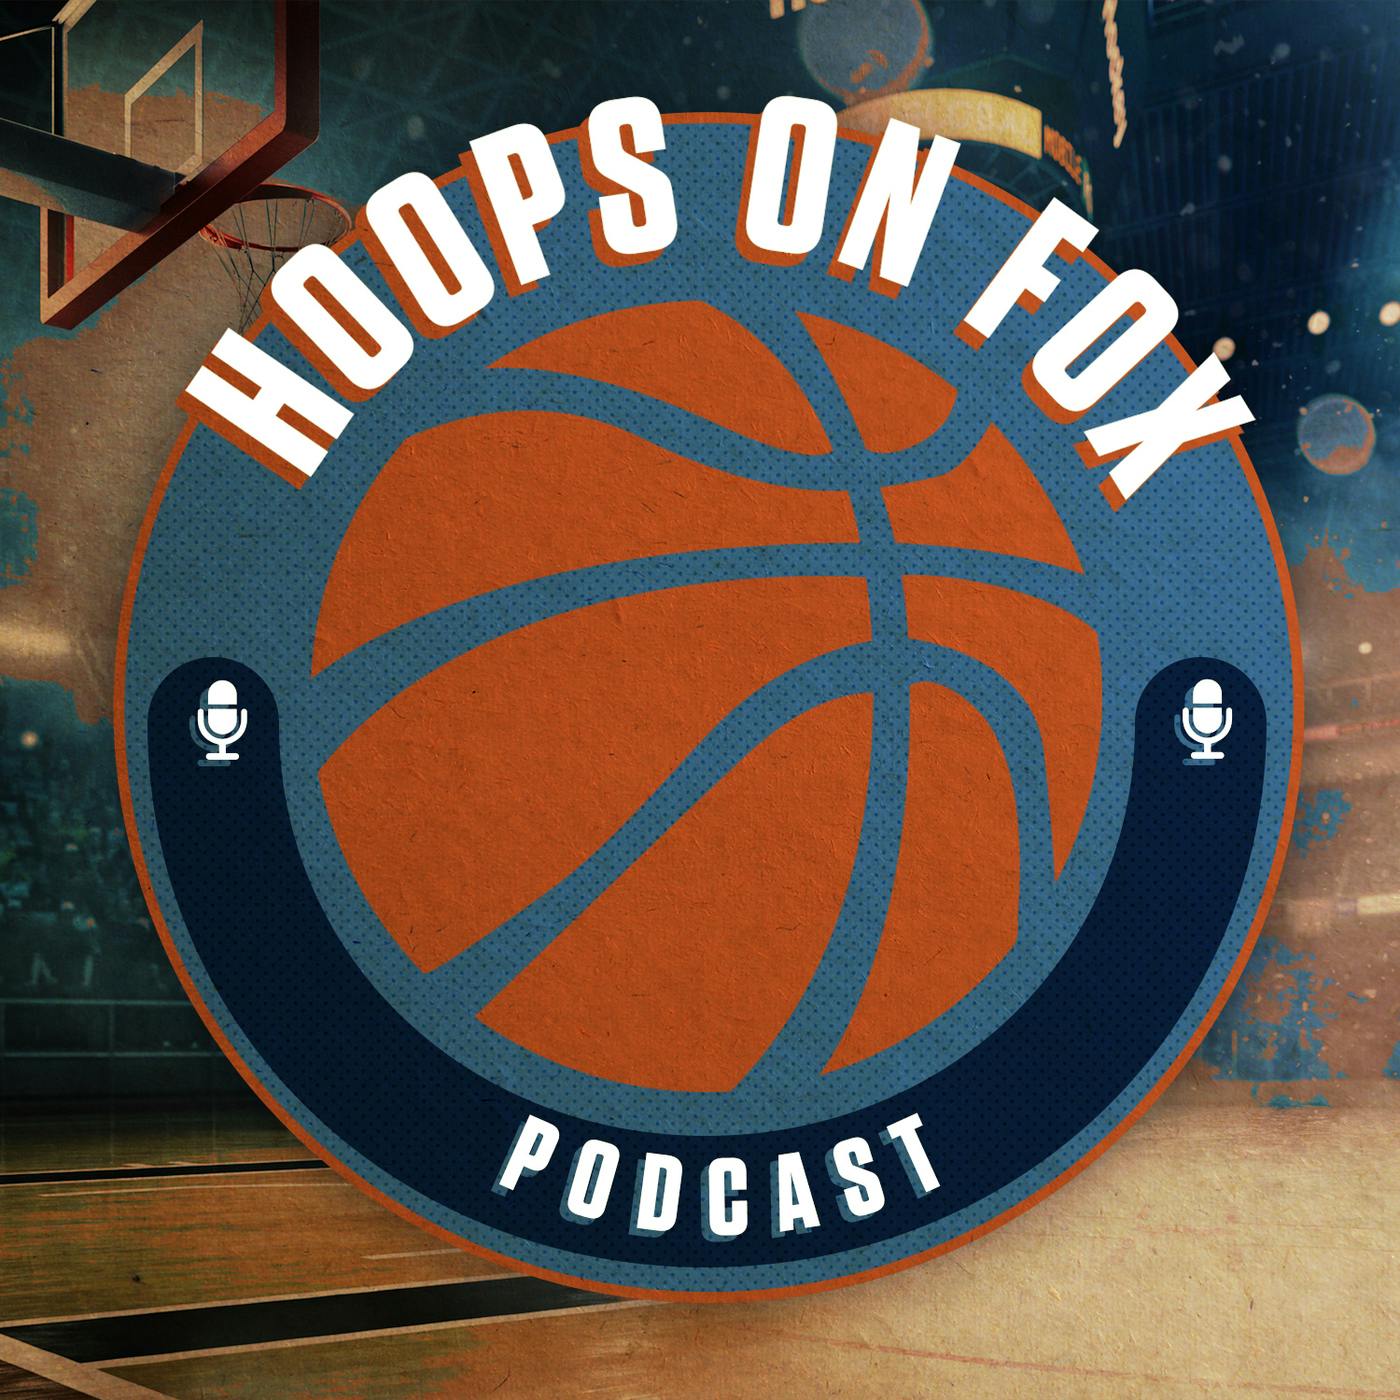 Ep 46 - Midseason Awards with Nick Wright - Harden or LeBron for MVP? - Ben Simmons or Donovan Mitchell for ROY?